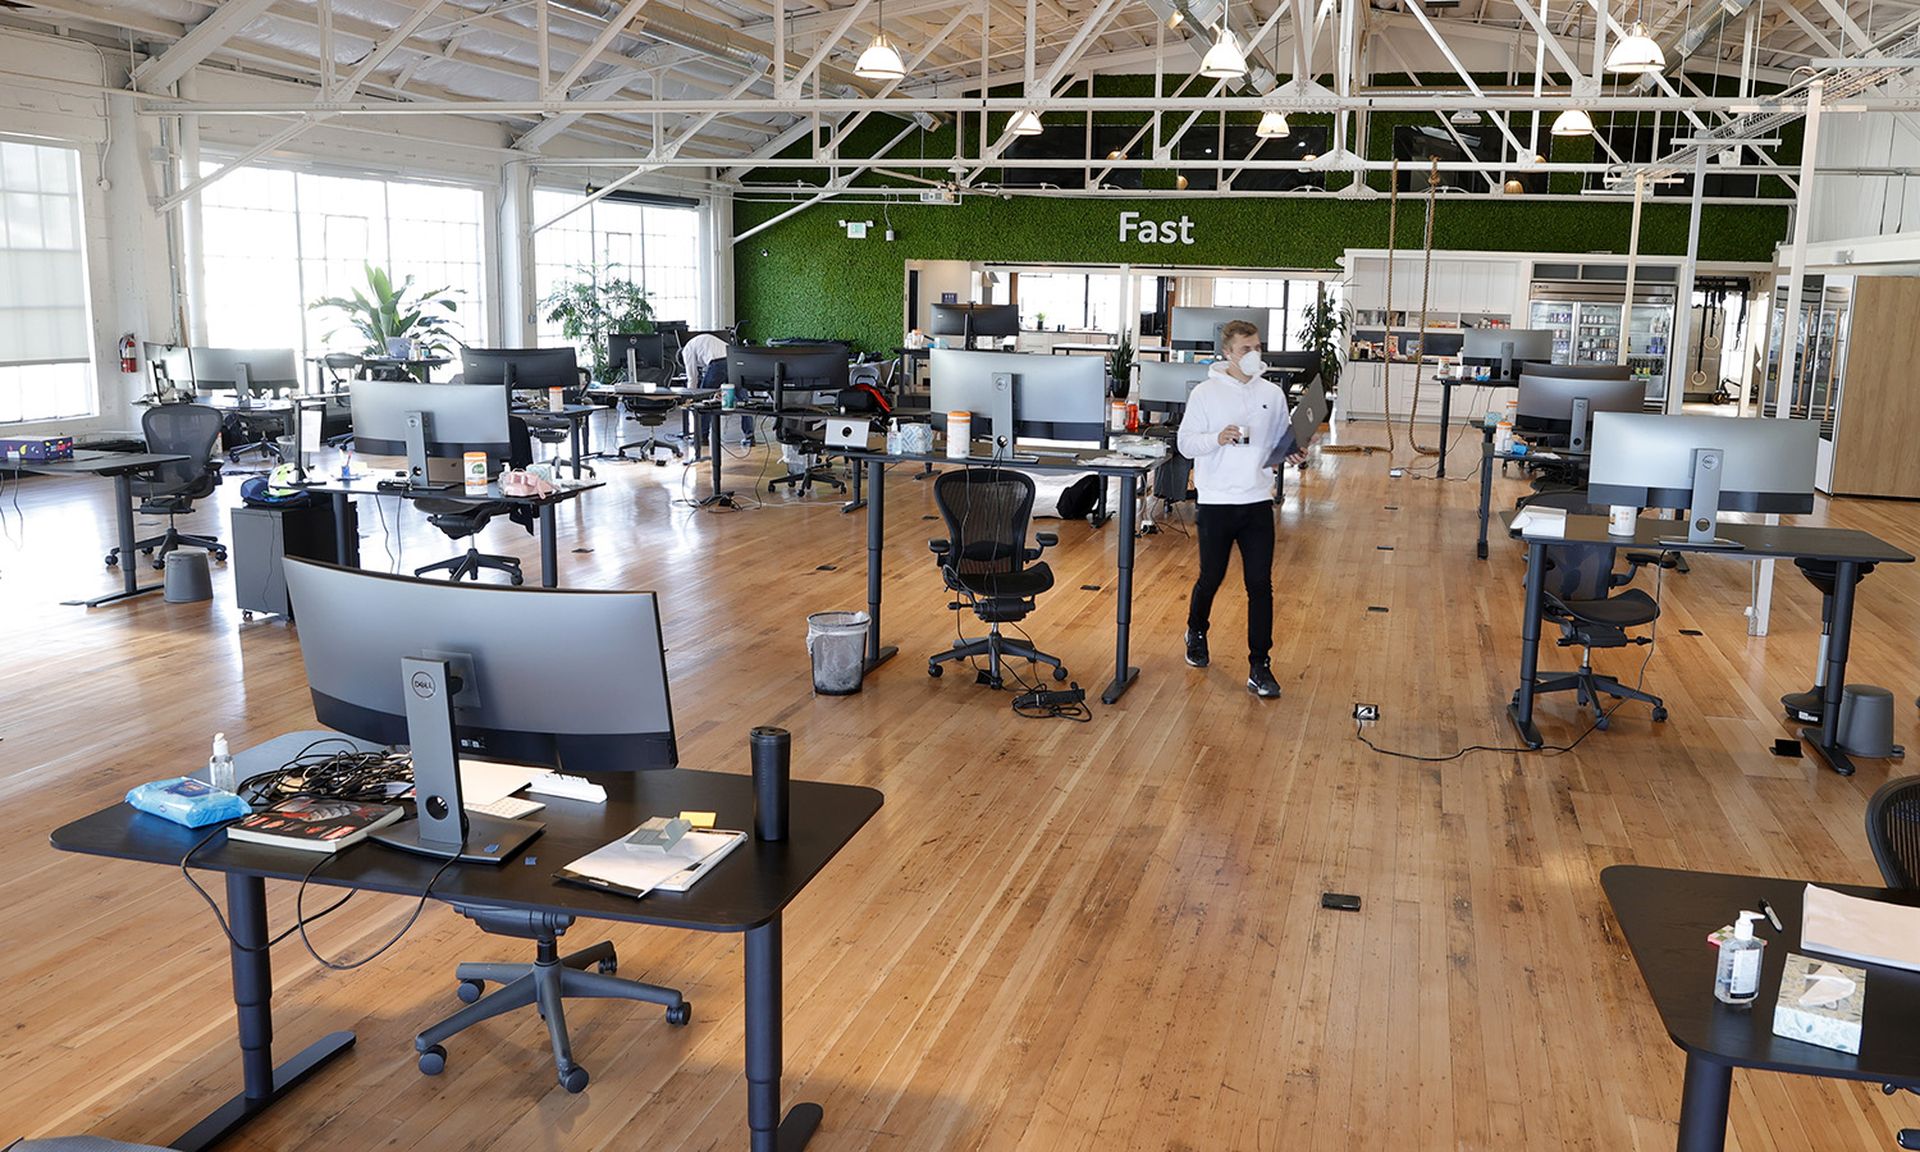 An employee at a tech startup walks by socially distanced desks in the office on March 24, 2021, in San Francisco. (Photo by Justin Sullivan/Getty Images)